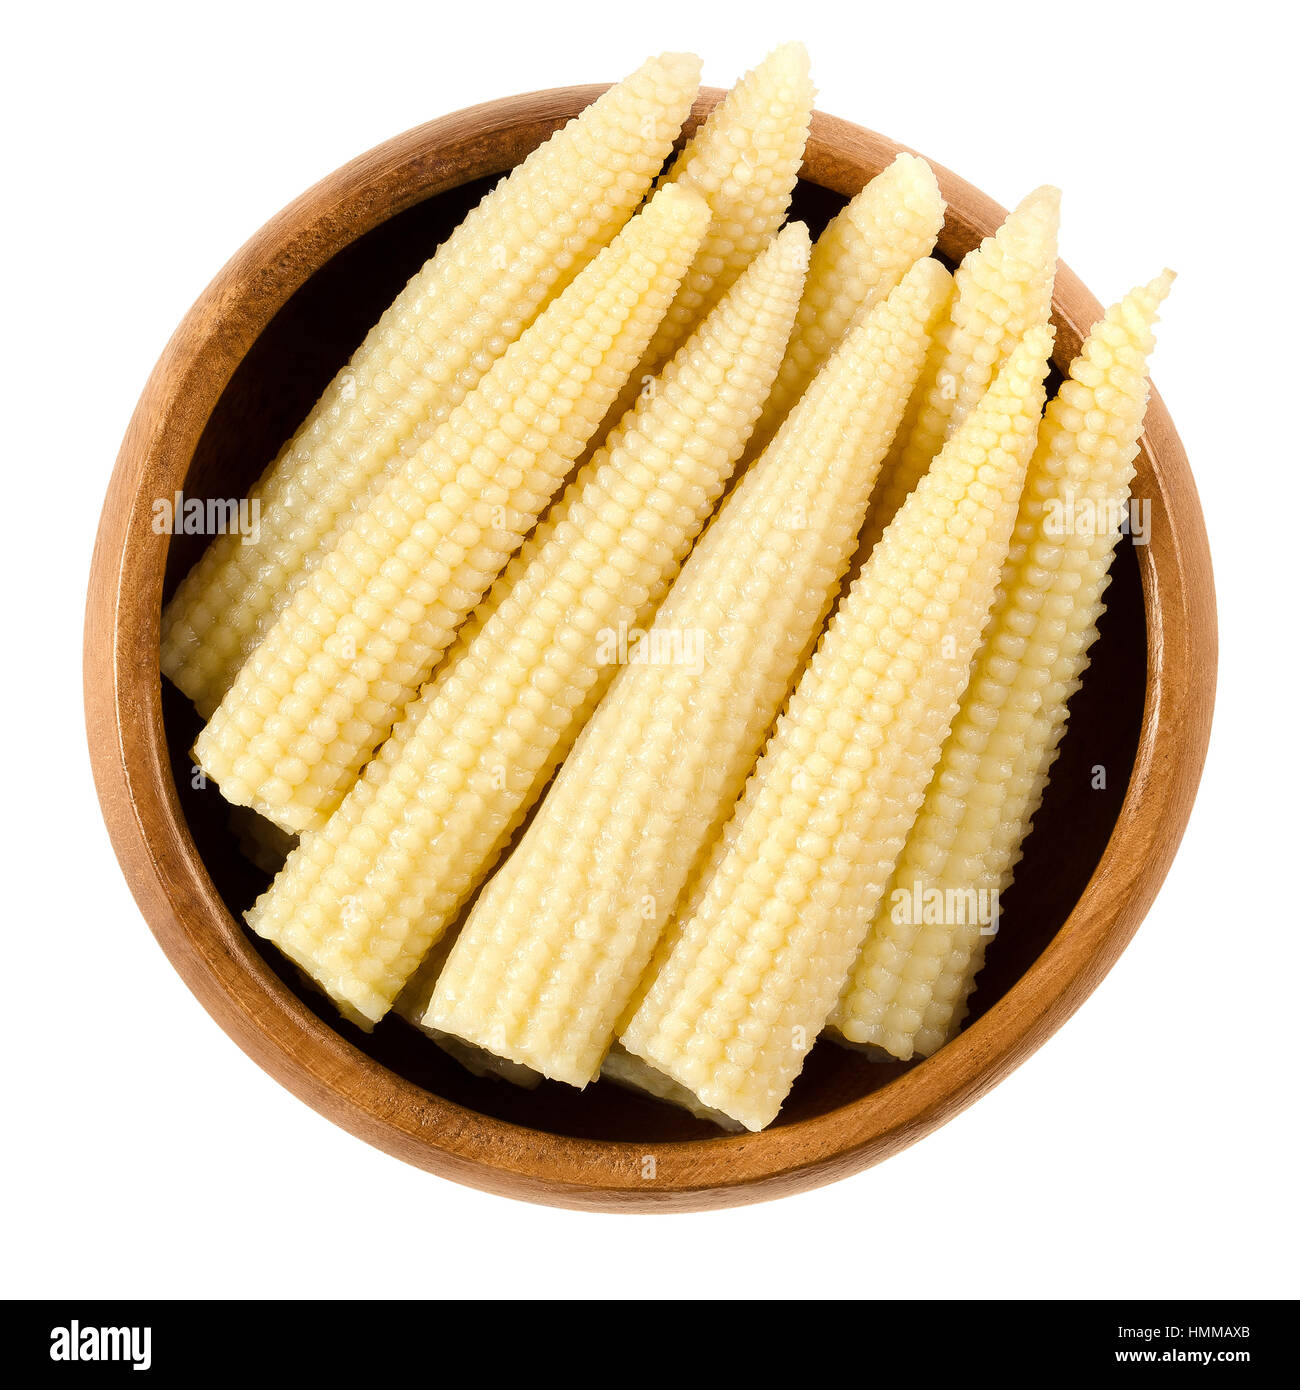 Pickled whole baby corn in wooden bowl. Preserved small cooked corn with bright yellow color in a solution of vinegar and salt. Macro photo. Stock Photo